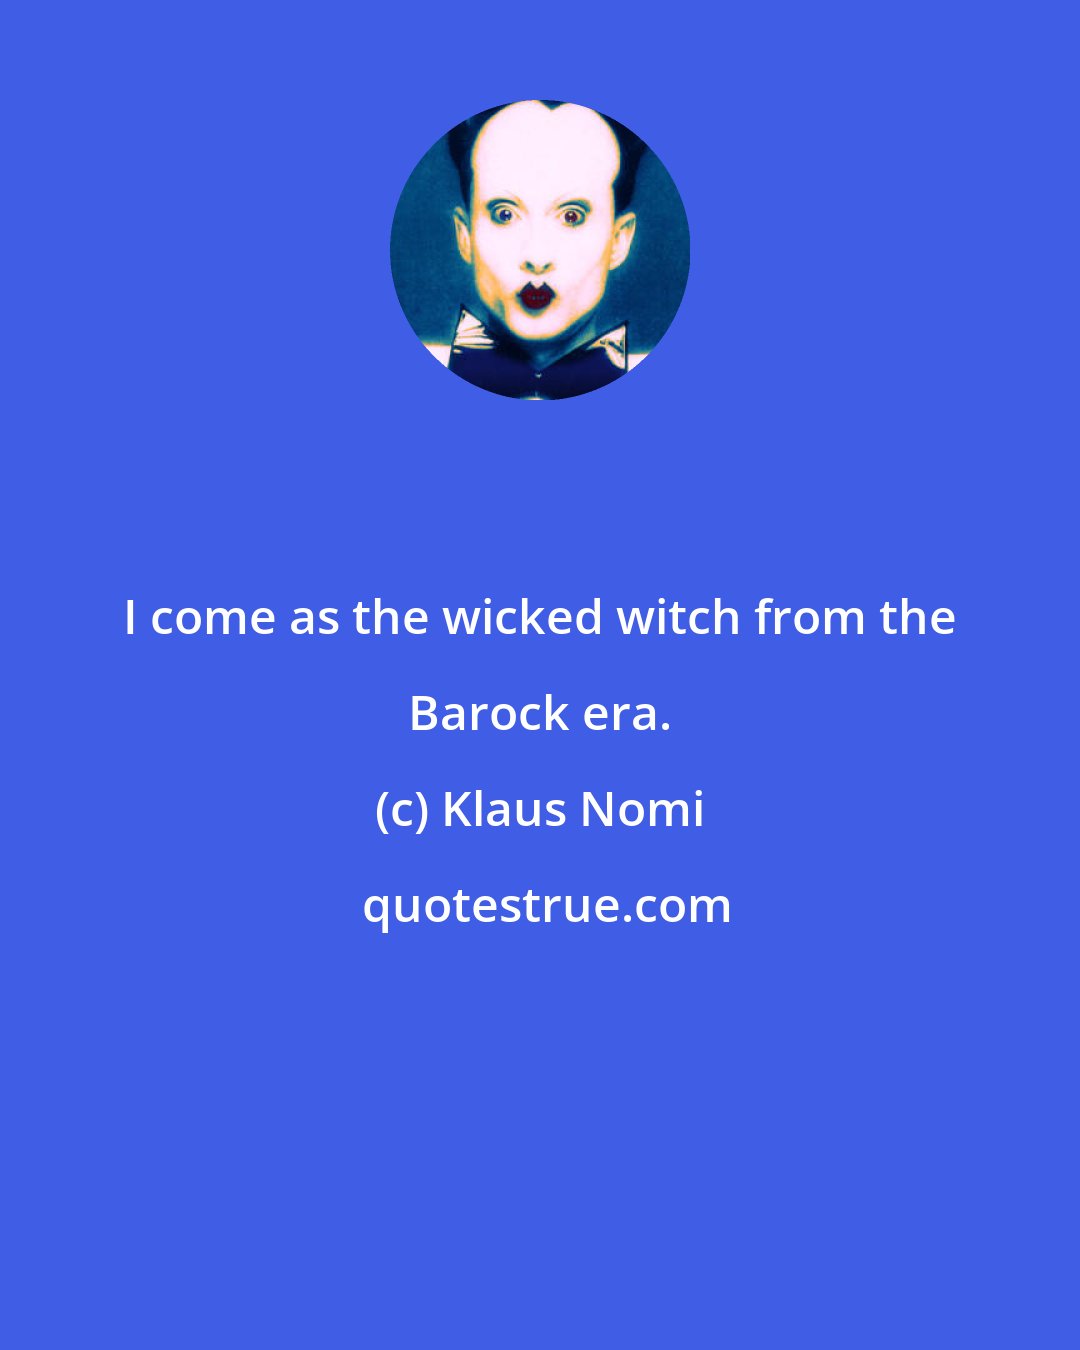 Klaus Nomi: I come as the wicked witch from the Barock era.